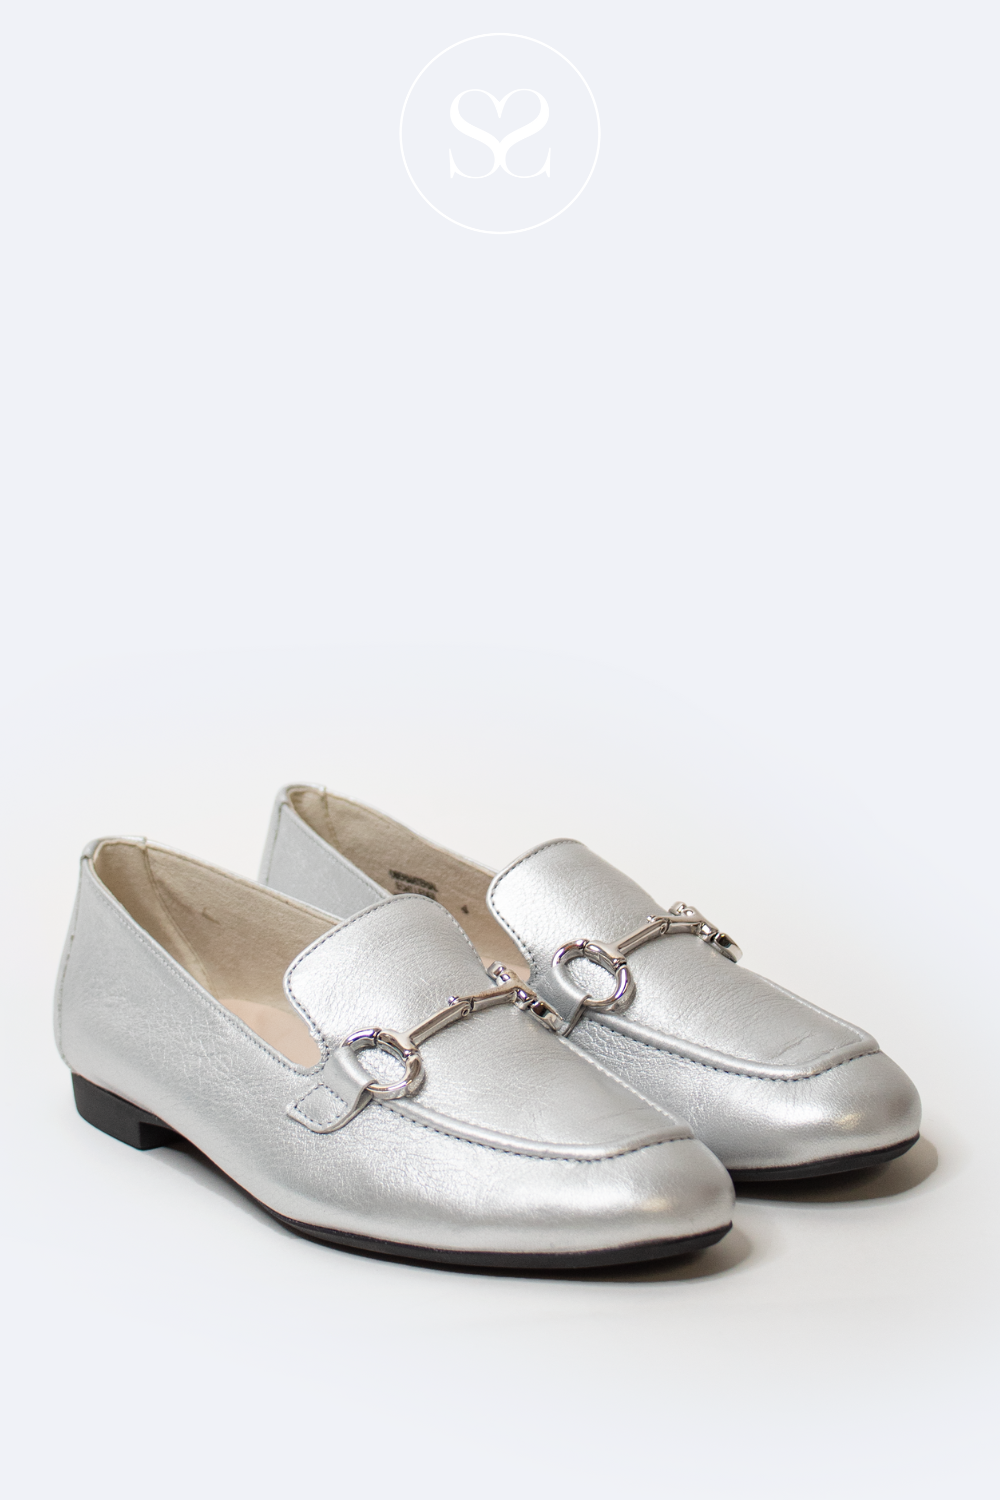 PAUL GREEN 2596 SILVER FLAT LEATHER SLIP ON LOAFER WITH SILVER BUCKLE